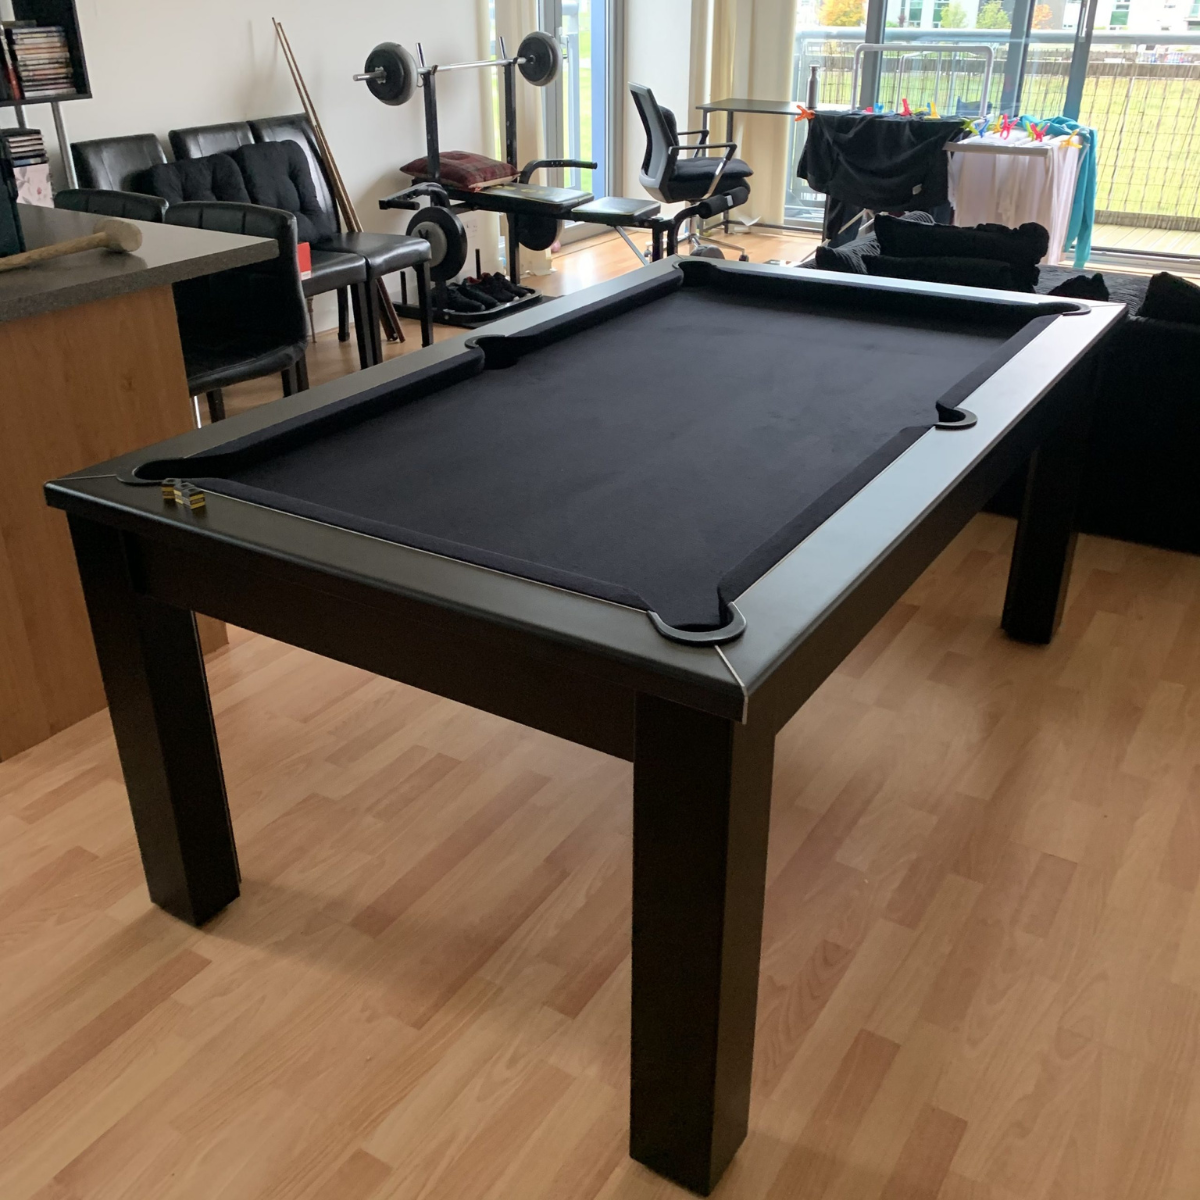 The Elixir 6ft & 7ft British Pool Table W/Dining Top Shadow Black